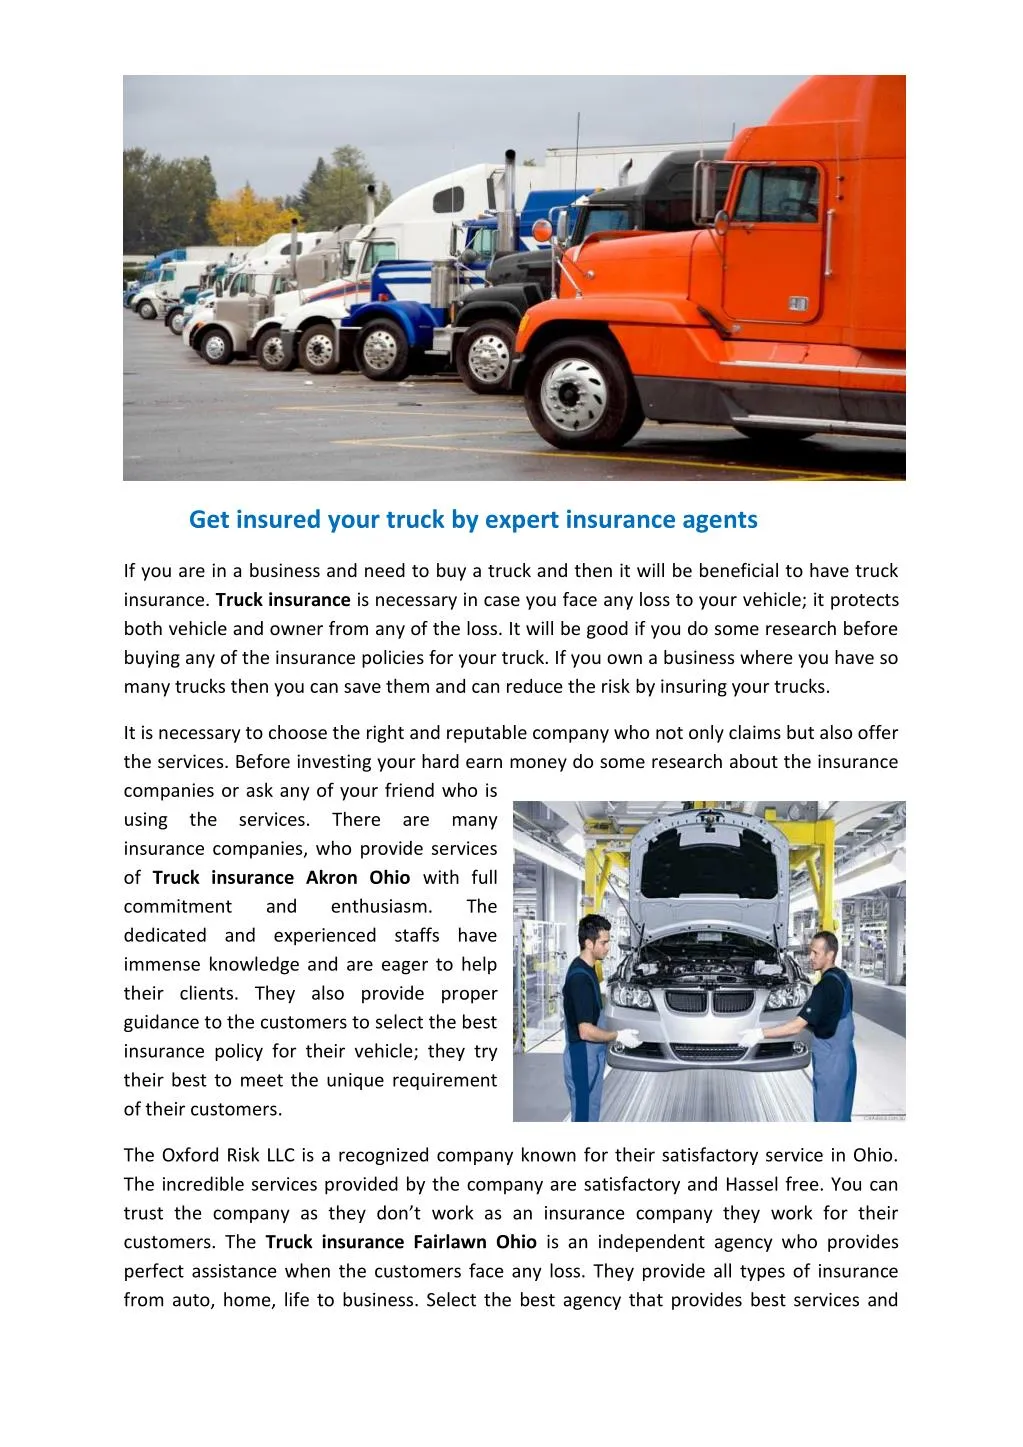 get insured your truck by expert insurance agents